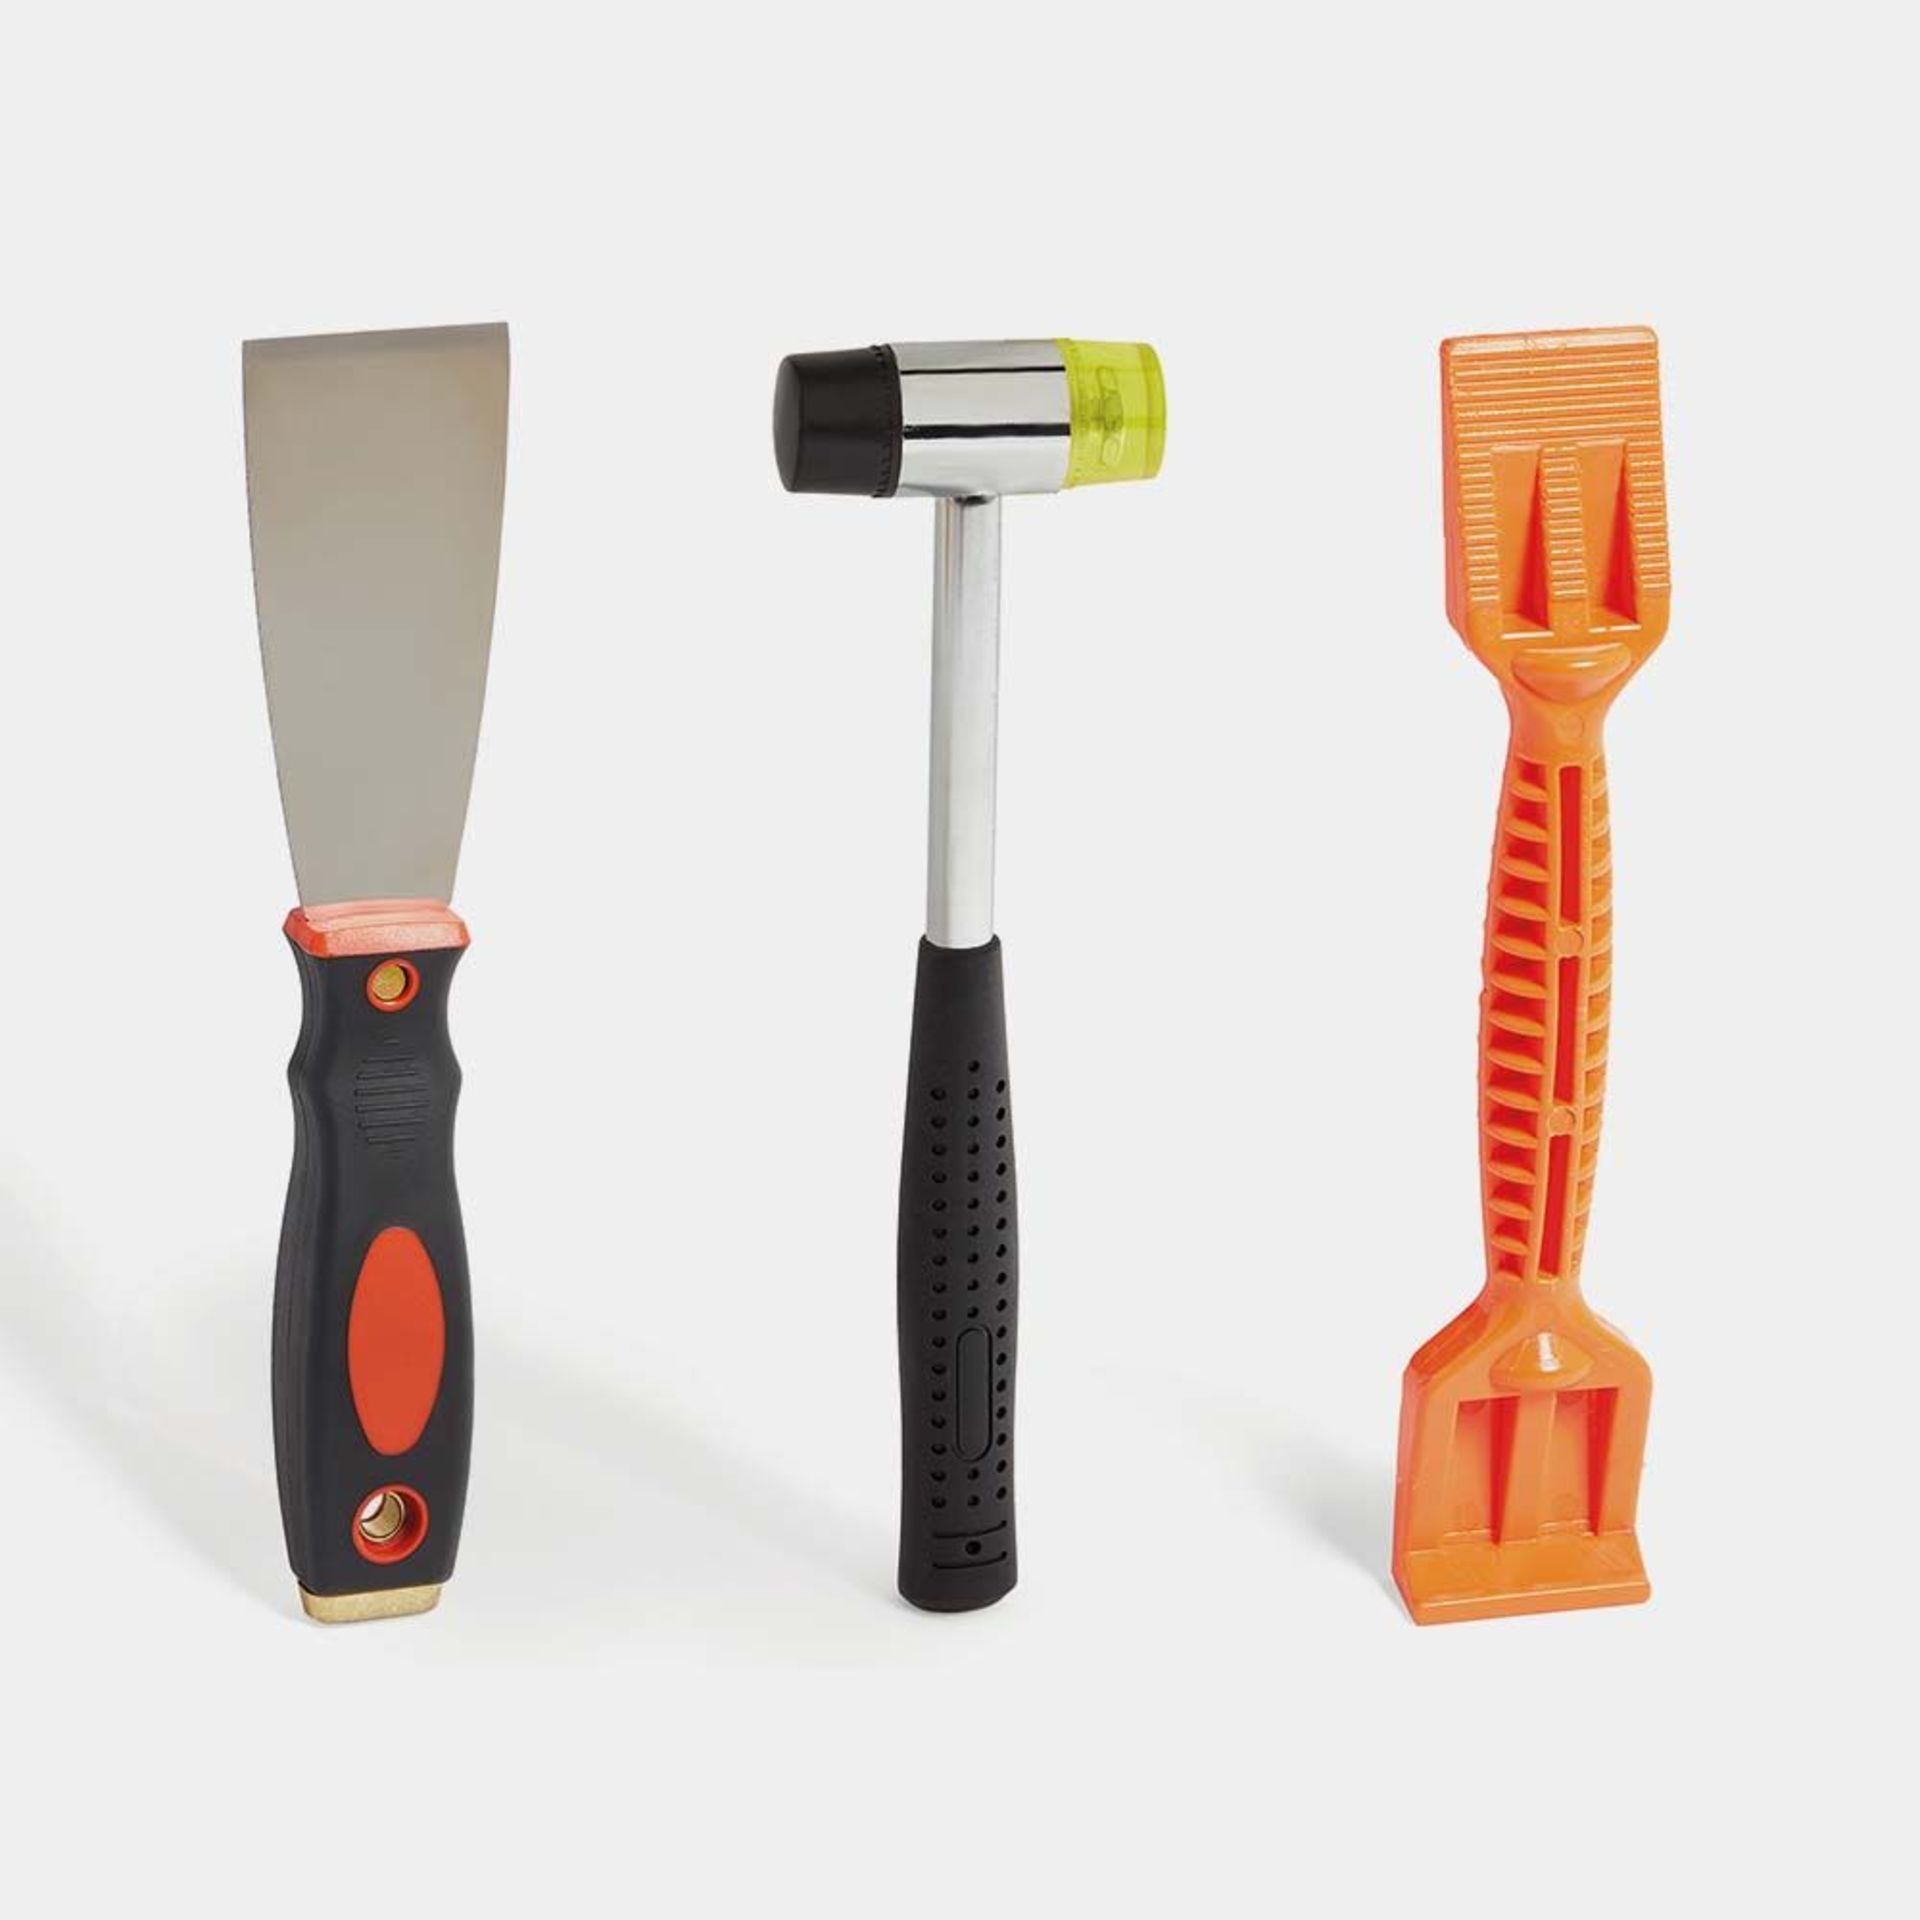 Window Glazing Tool Kit. -S2. Made with high-quality steel, rubber, and polypropylene, have peace of